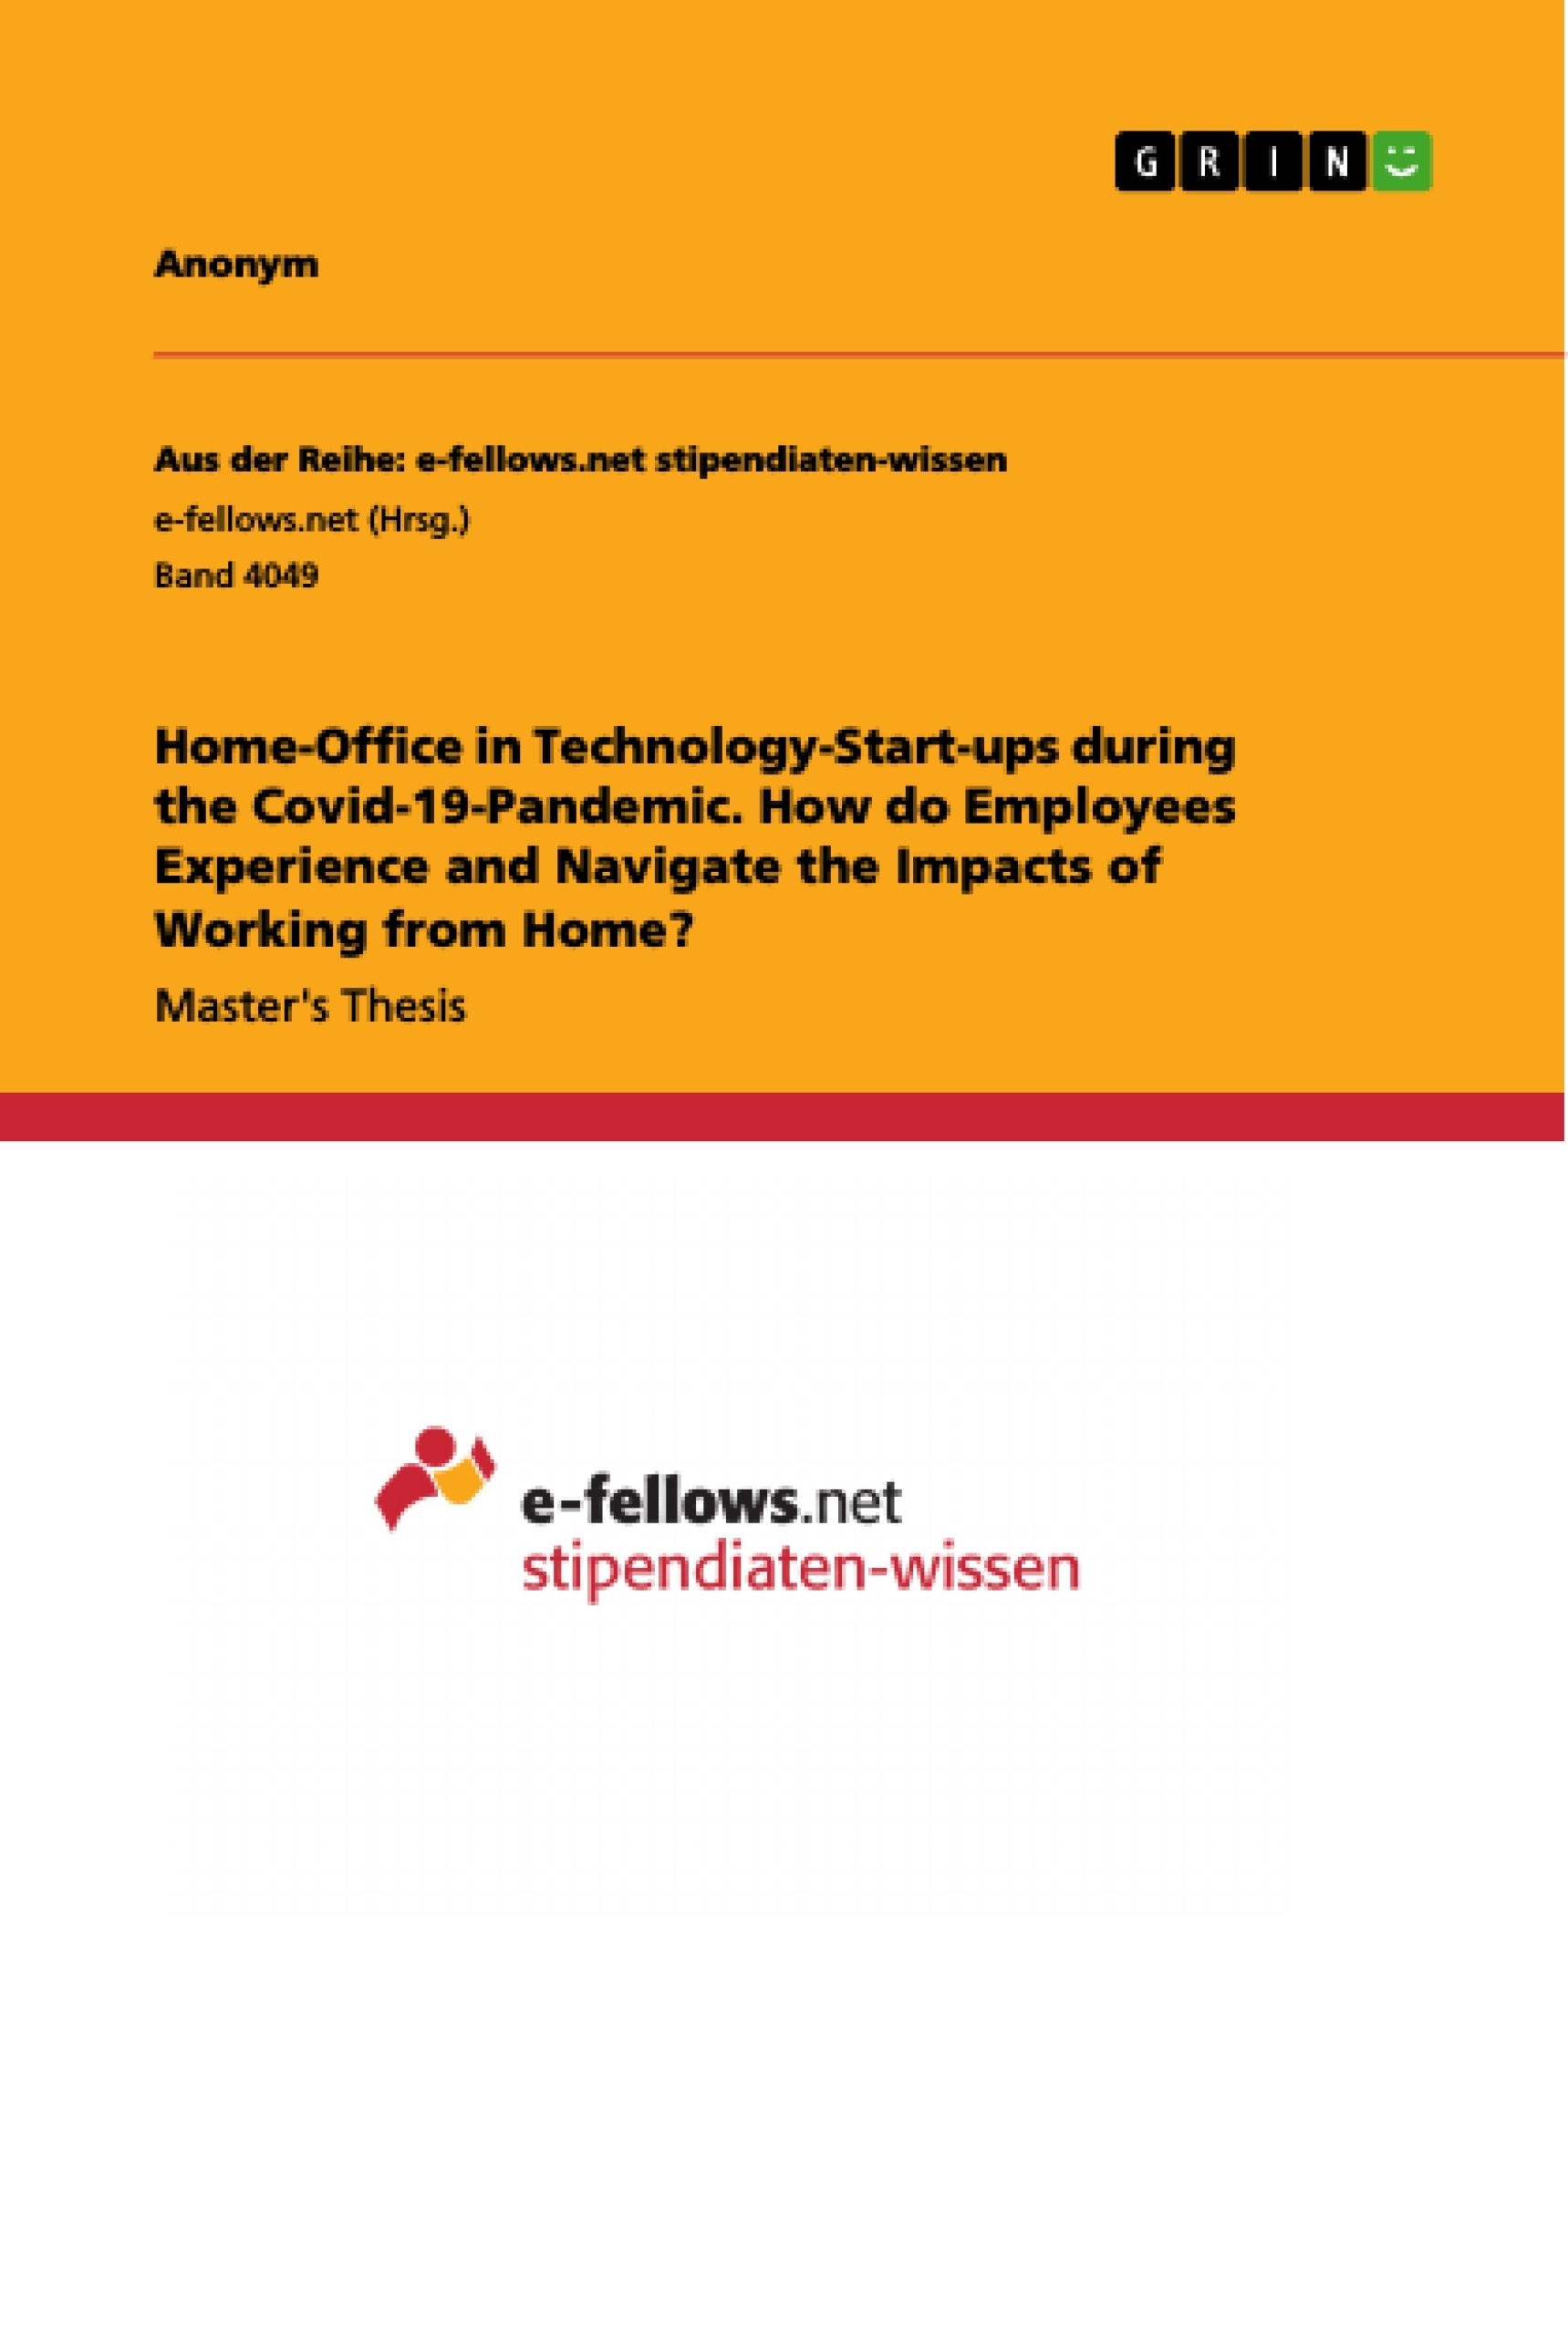 Title: Home-Office in Technology-Start-ups during the Covid-19-Pandemic. How do Employees Experience and Navigate the Impacts of Working from Home?